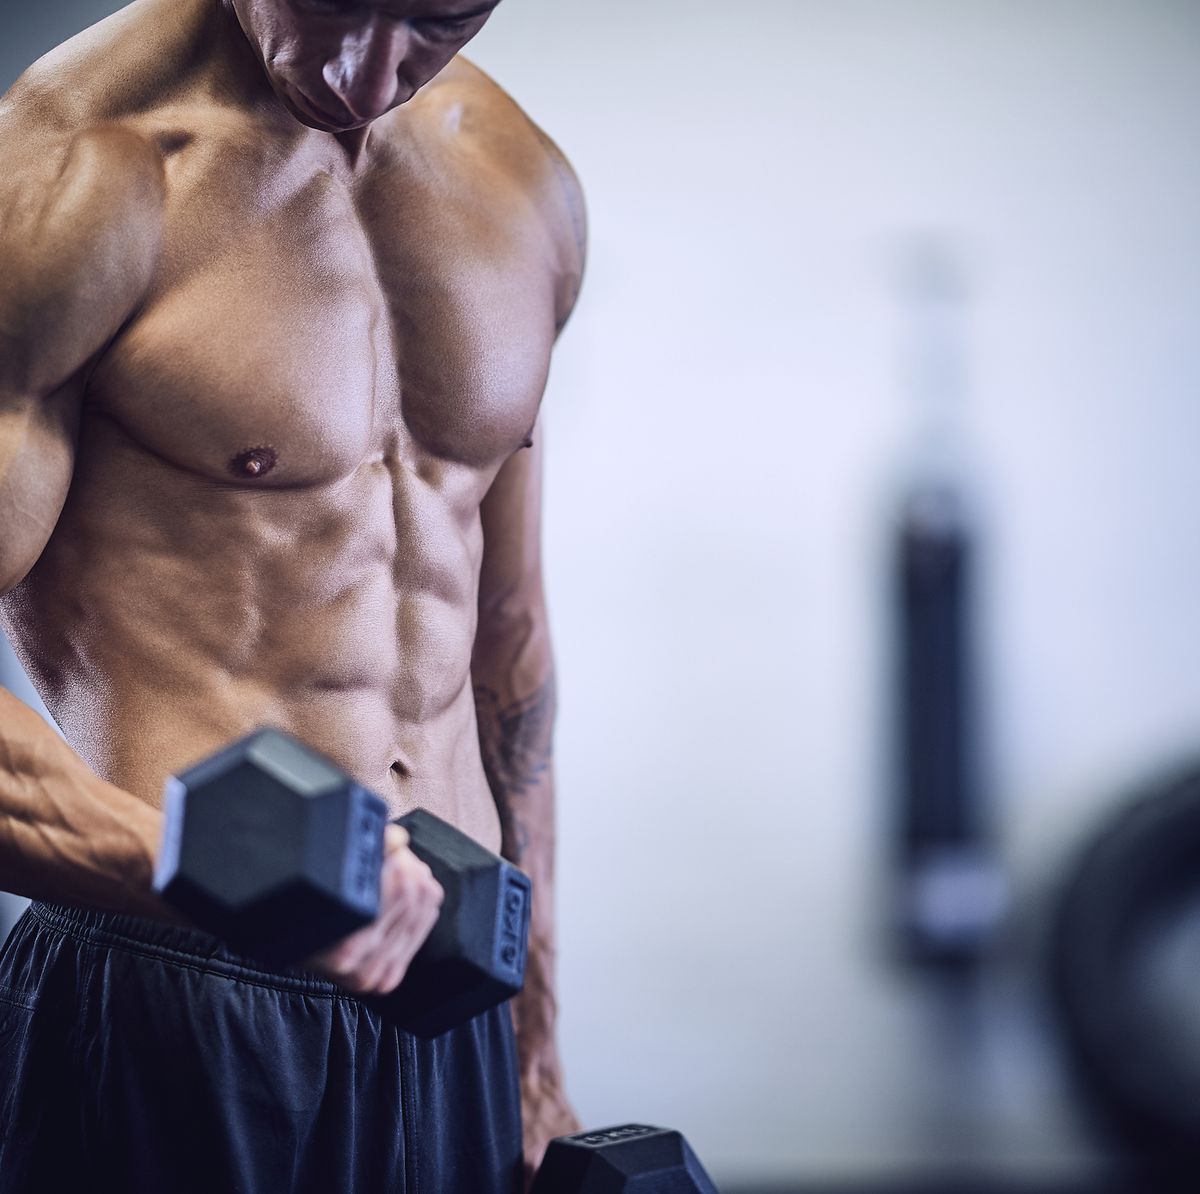 Fitness  Why six-pack abs are so hard to achieve – and maintain